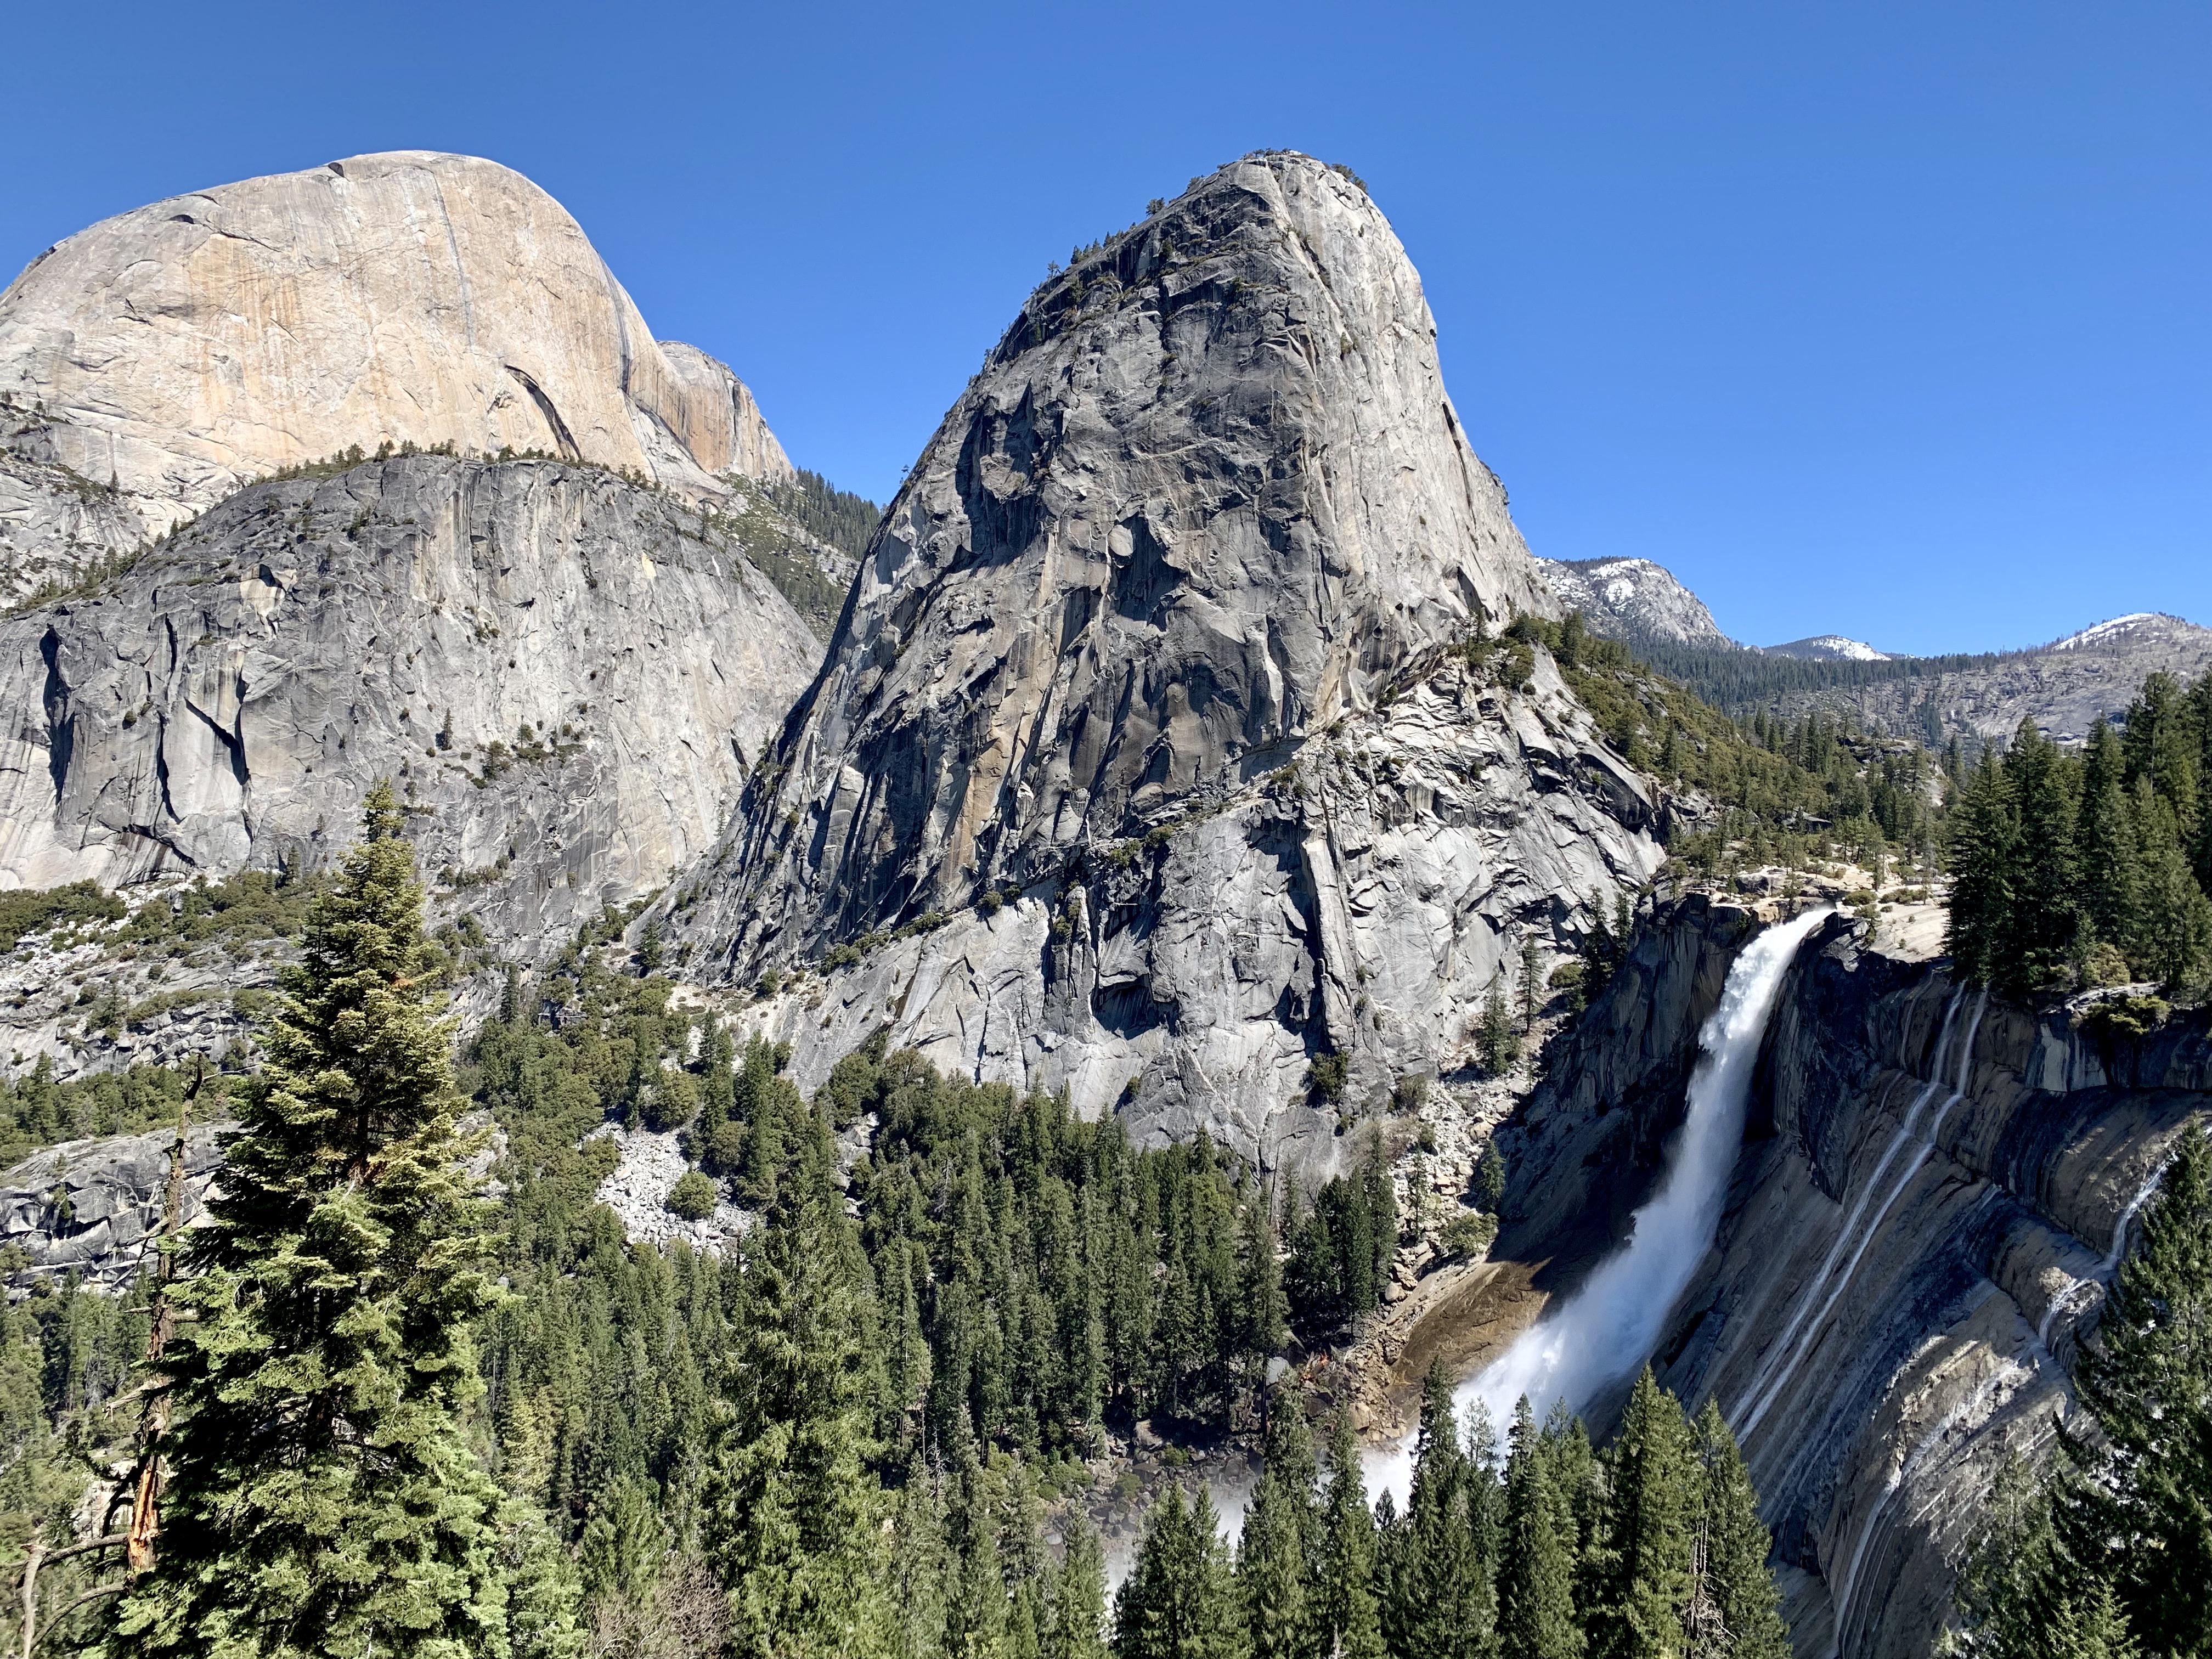 Yosemite 4K wallpaper for your desktop or mobile screen free and easy to download